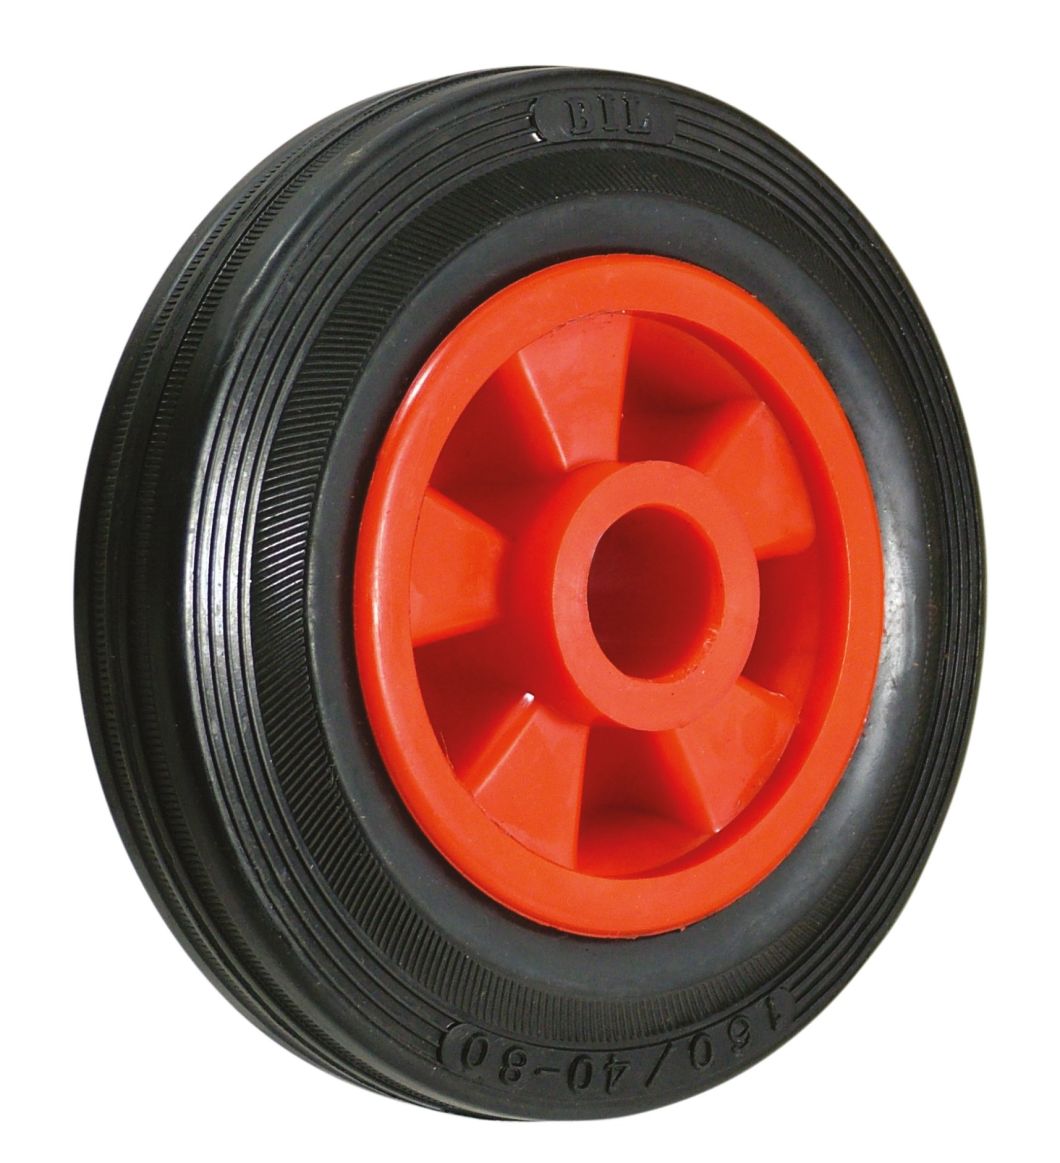 Plastic or Steel Rim Solid Rubber Wheel (10 Inches)